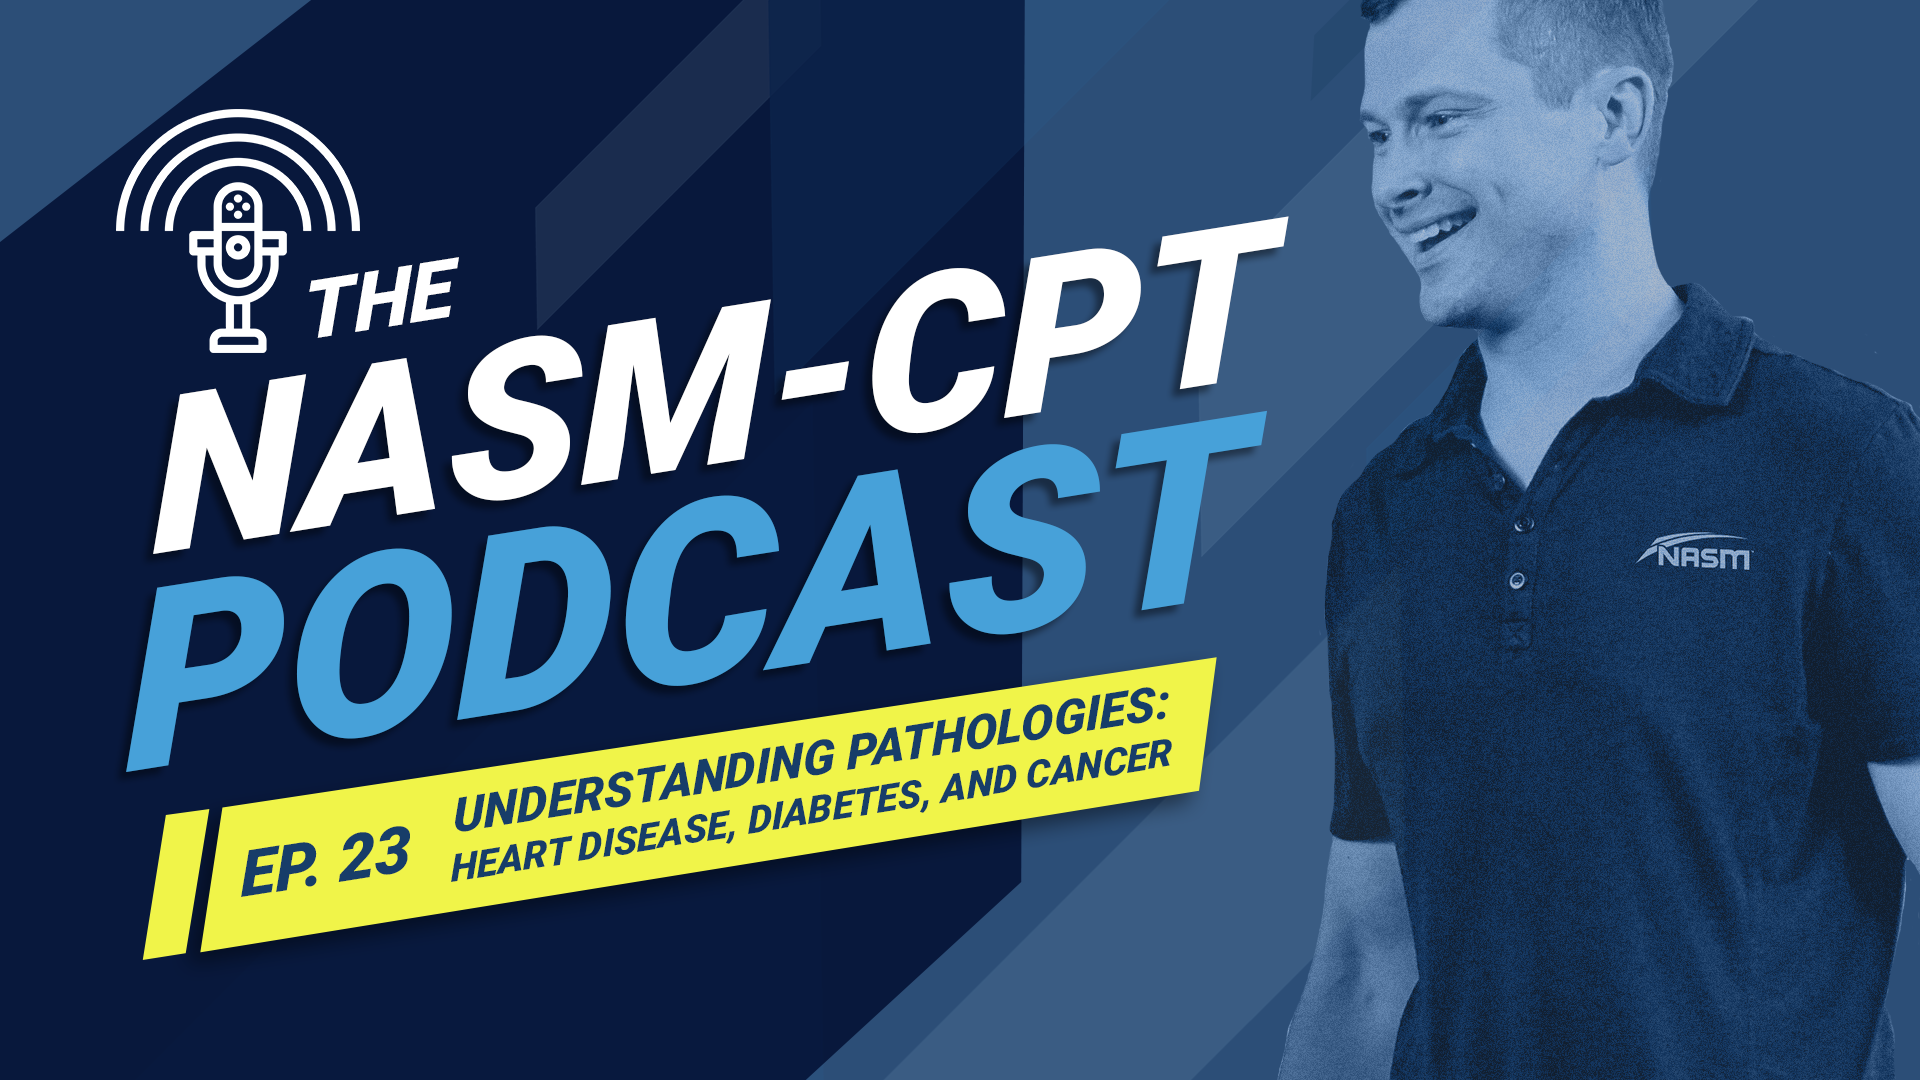 Sportstraining-Weightloss-CPT Podcast EP. 23